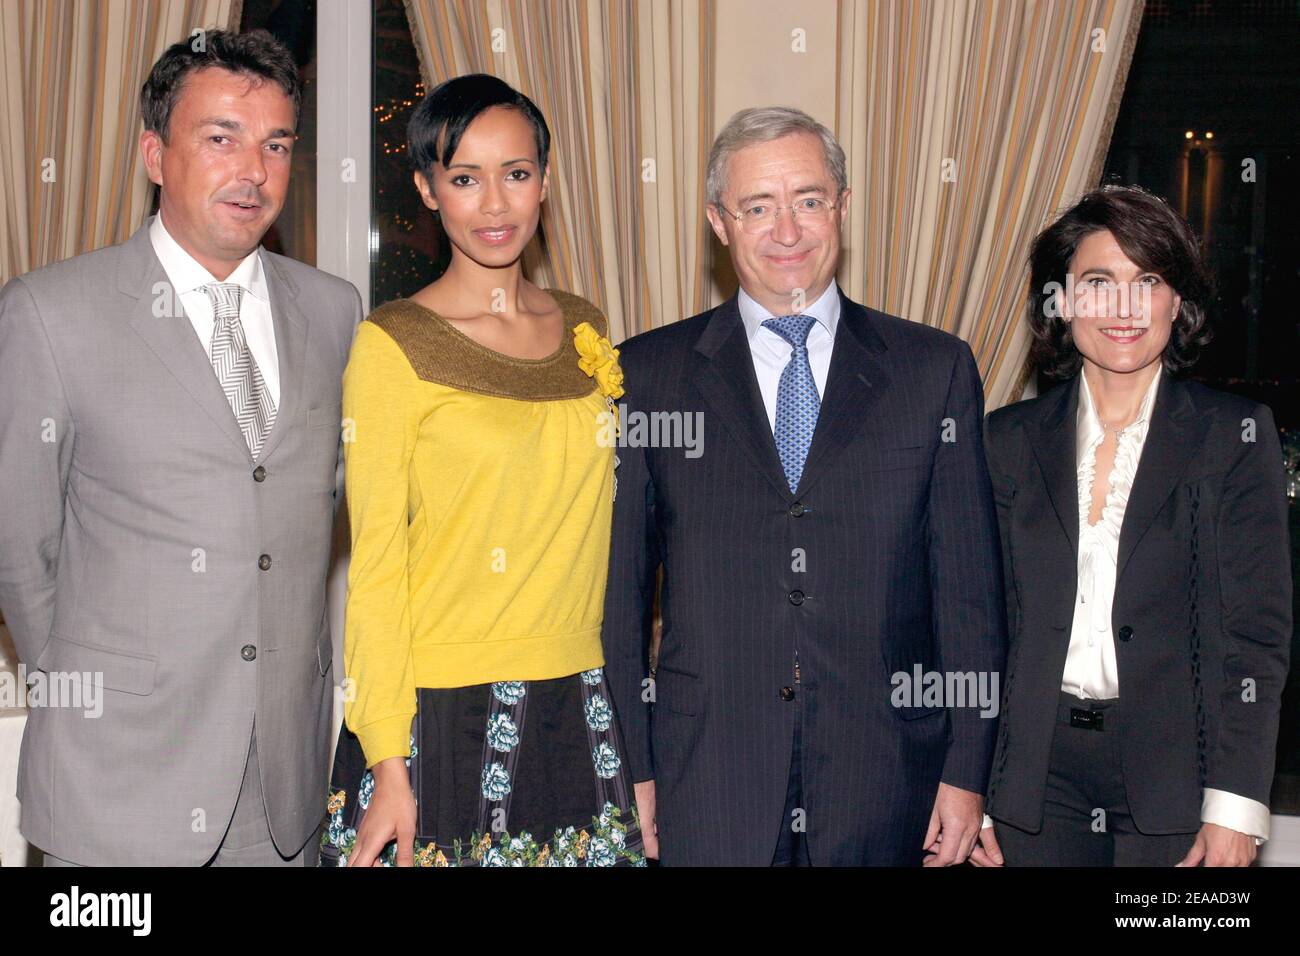 L to R) Cartier shop manager Olivier Collignon, Former Miss France Sonia  Rolland and Hotel Bristol Manager Jean Louis Souman, Piaget shop manager  Miss Sautreau attend the cocktail at Hotel Bristol before